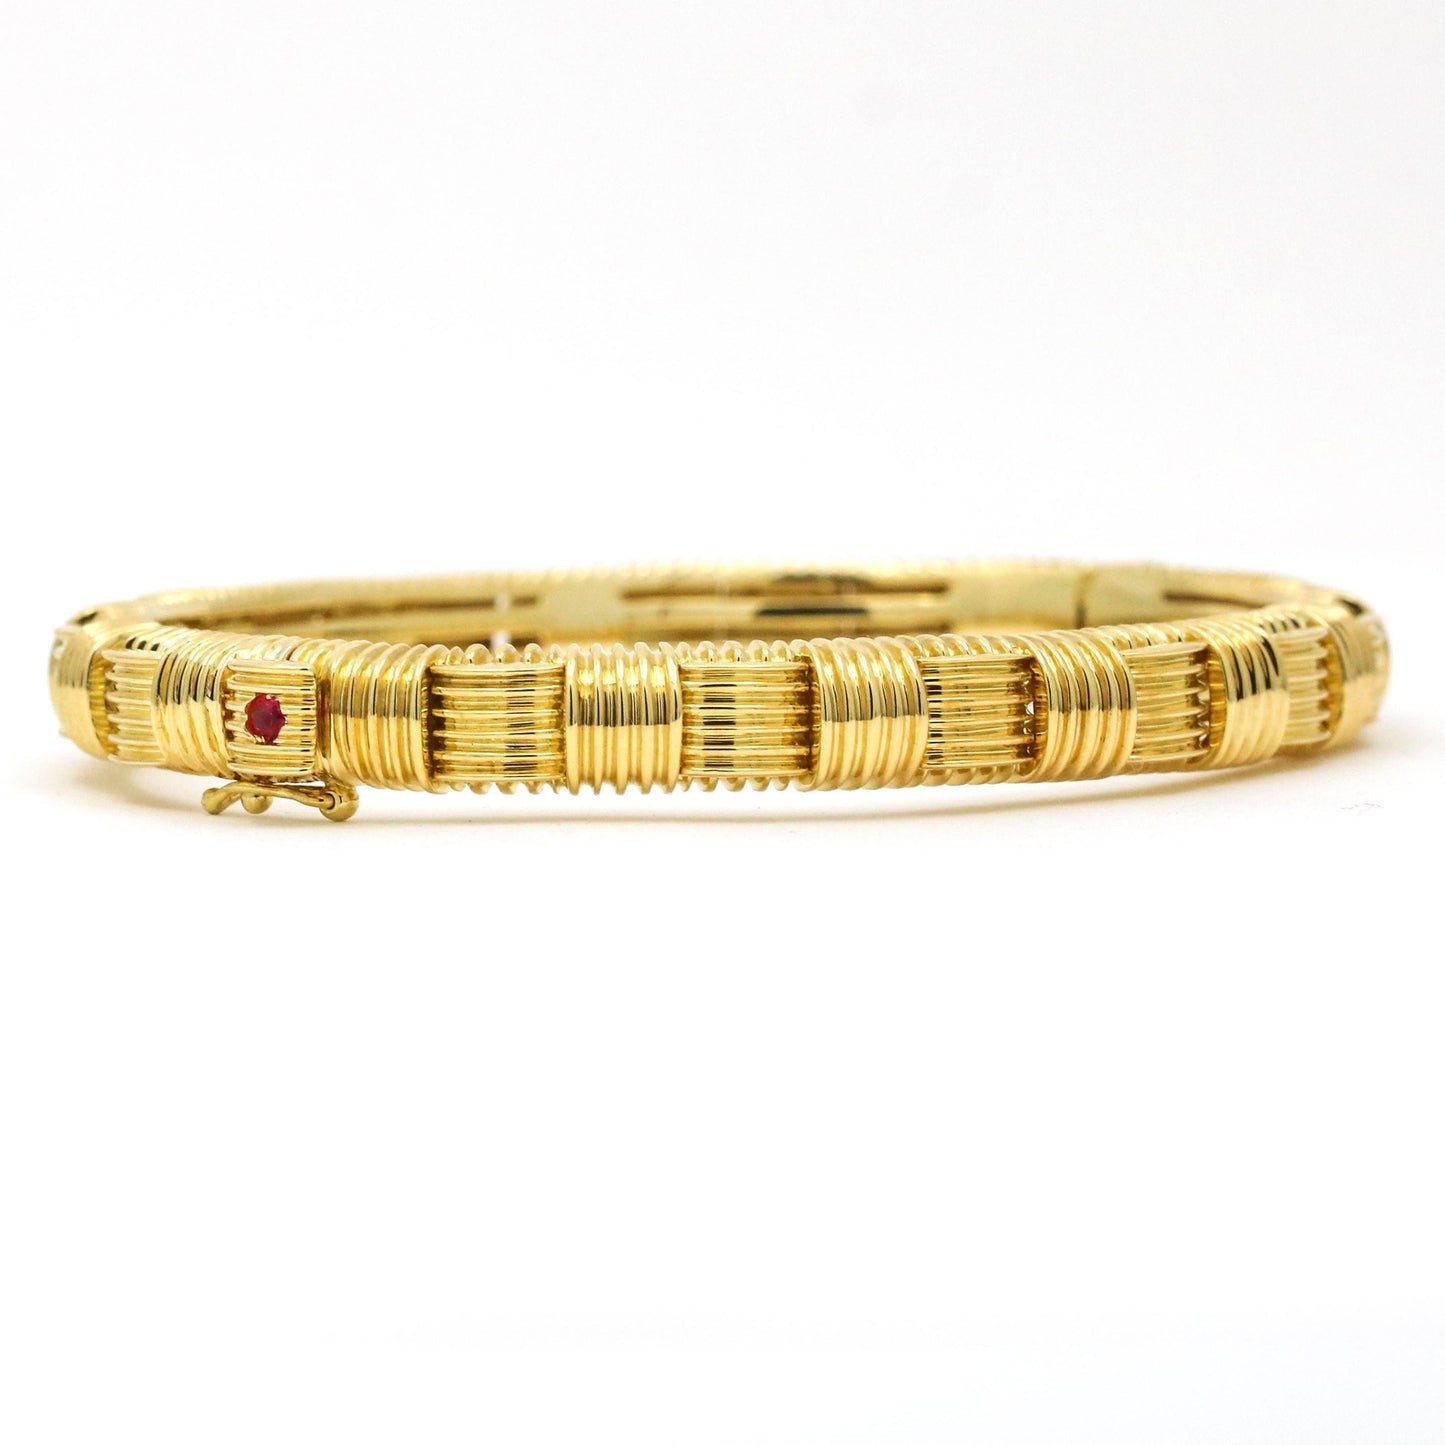 Roberto Coin Appassionata Hinged Bangle Bracelet in 18k Yellow Gold - 31 Jewels Inc.